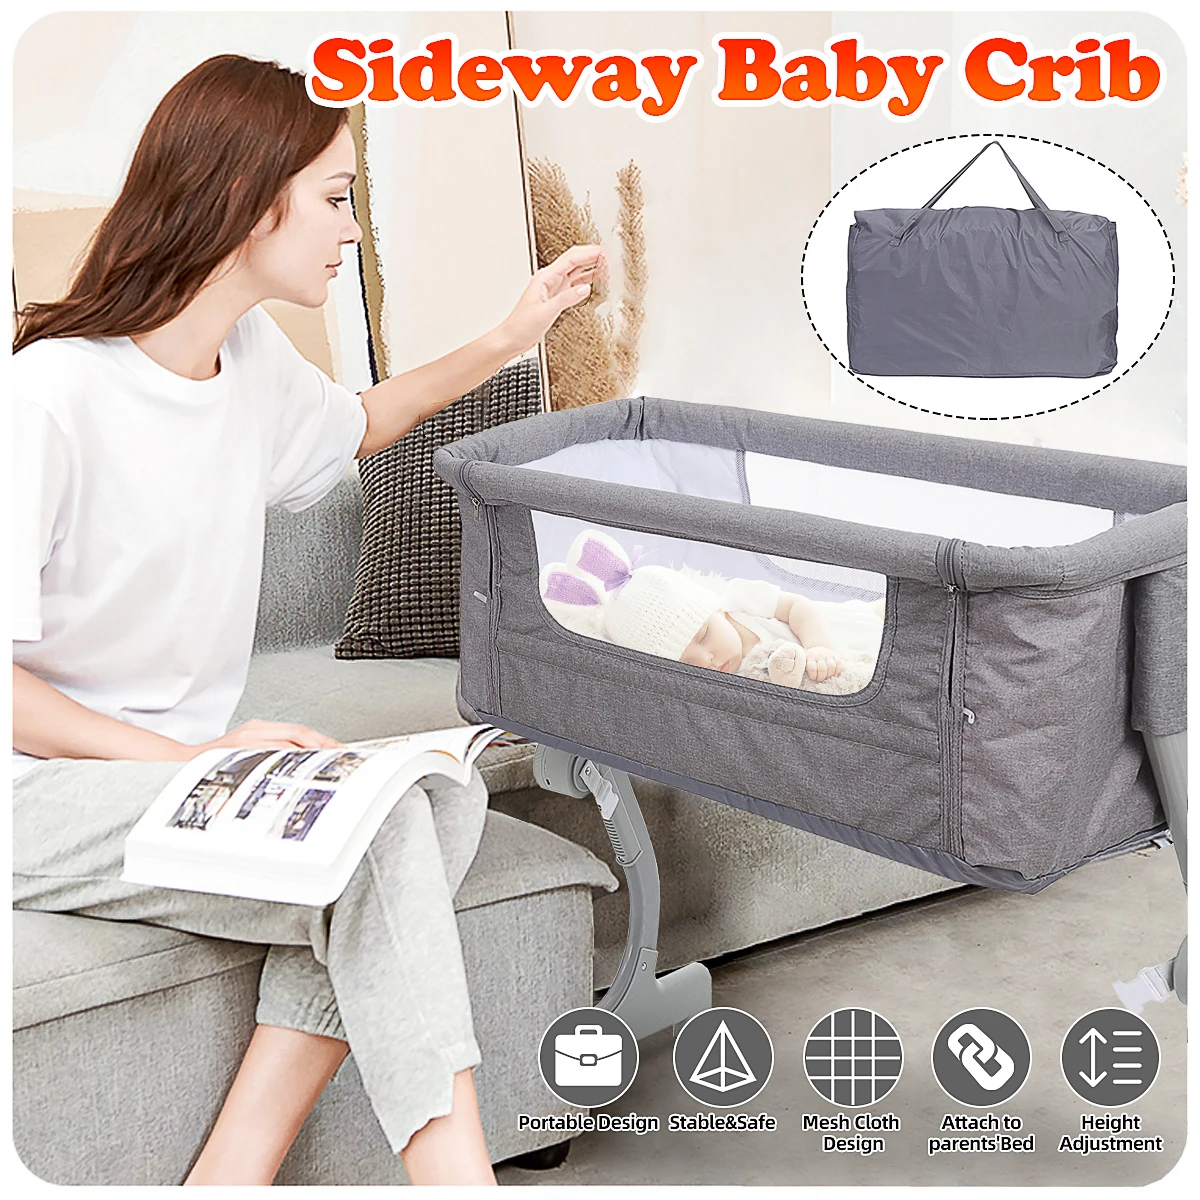 

Baby Crib Cradle Newborn Movable Portable Nest Crib Baby Travel Bed Game Stitching Sleeping Bed Heights Adjustable With Wheels